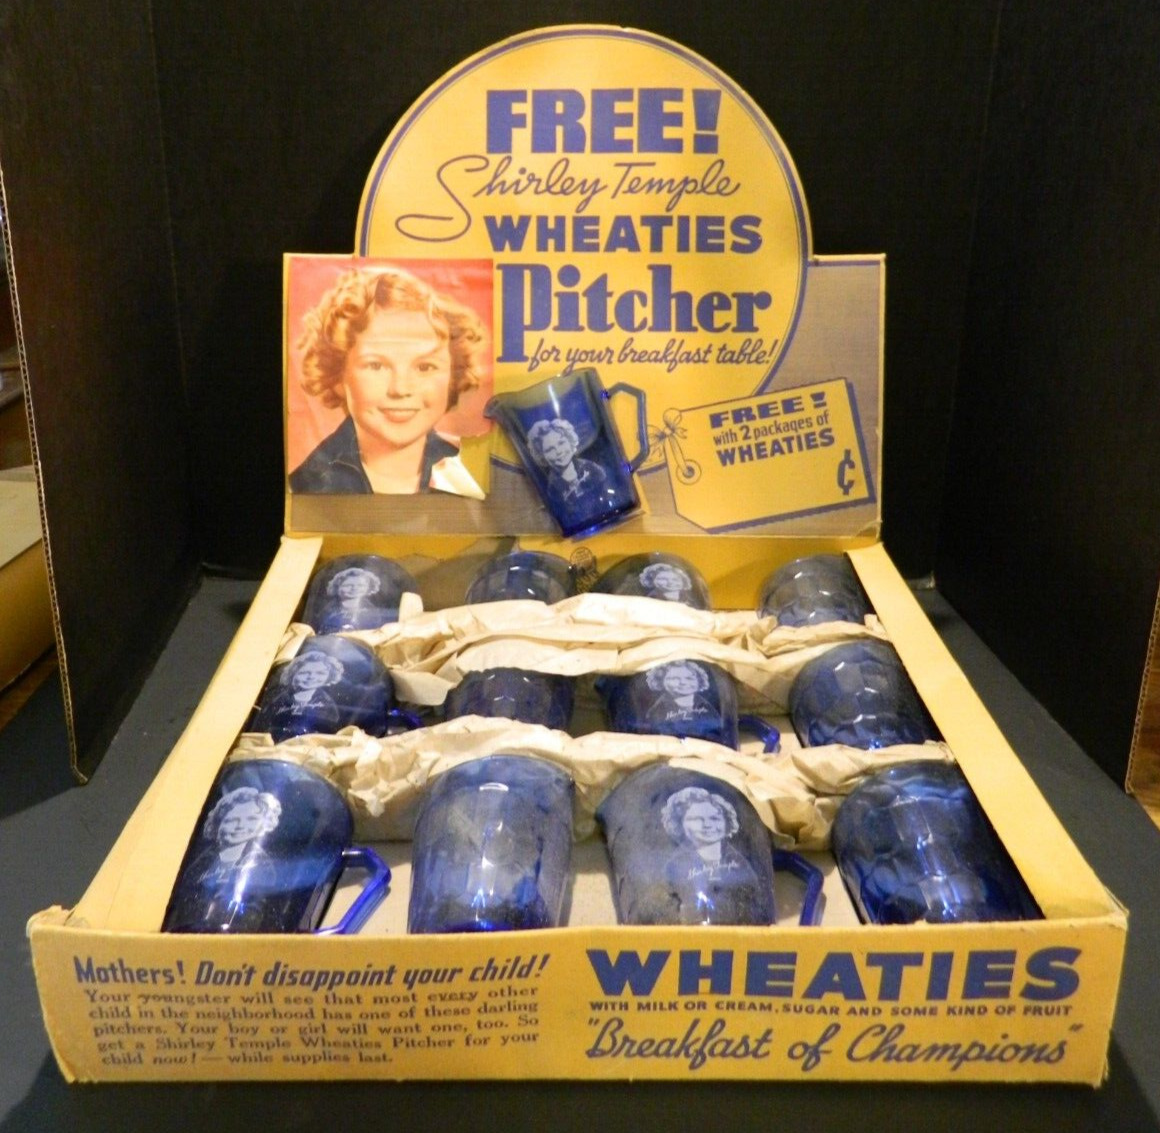 Antique Wheaties Shirley Temple Free Pitcher Store Display w/ 13 Pitchers (1935)